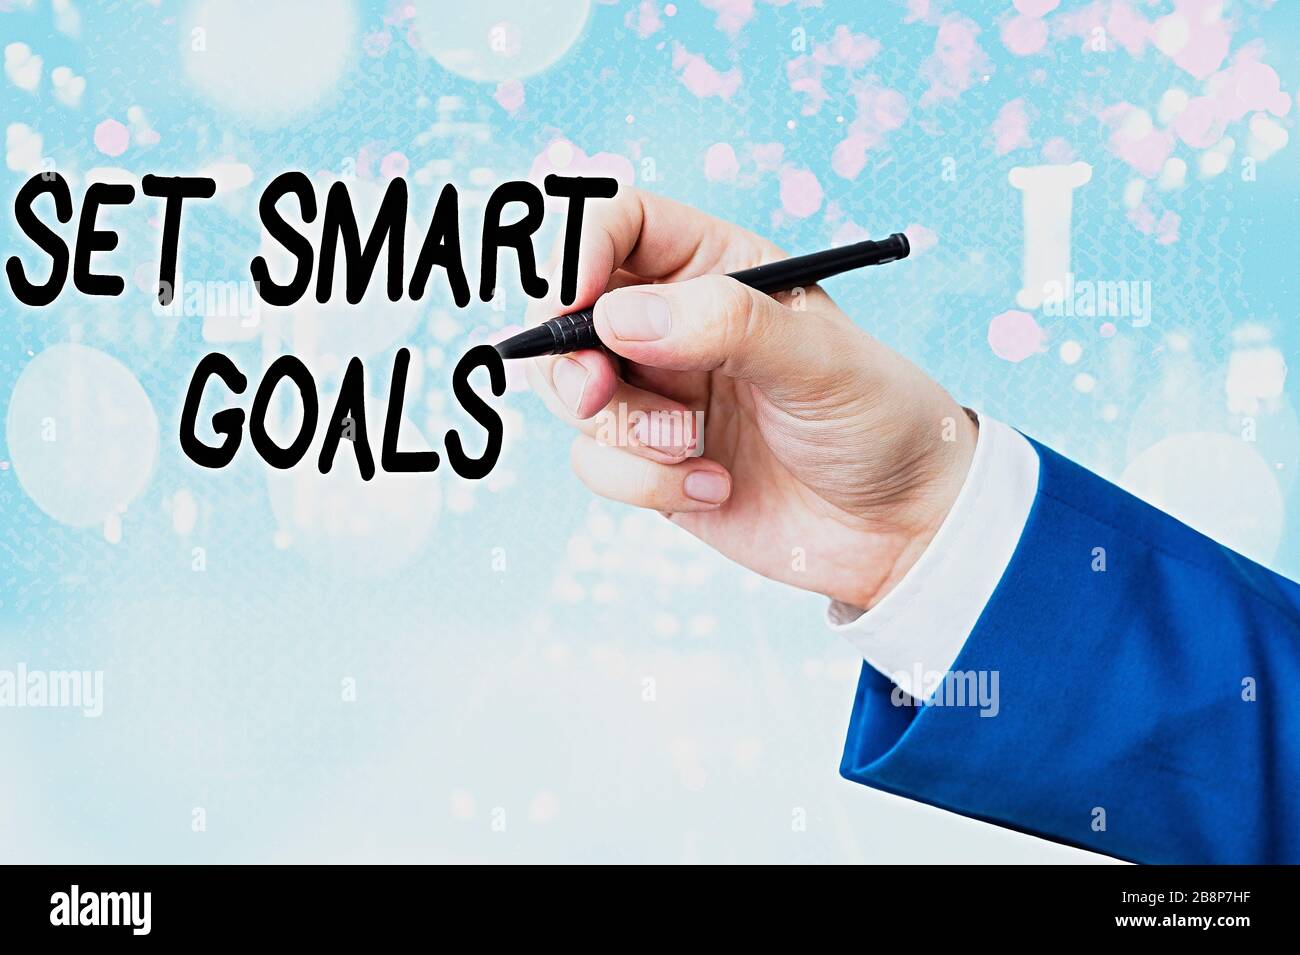 Conceptual Hand Writing Showing Set Smart Goals Concept Meaning Giving Criteria To Guide In The Setting Of Objectives Stock Photo Alamy